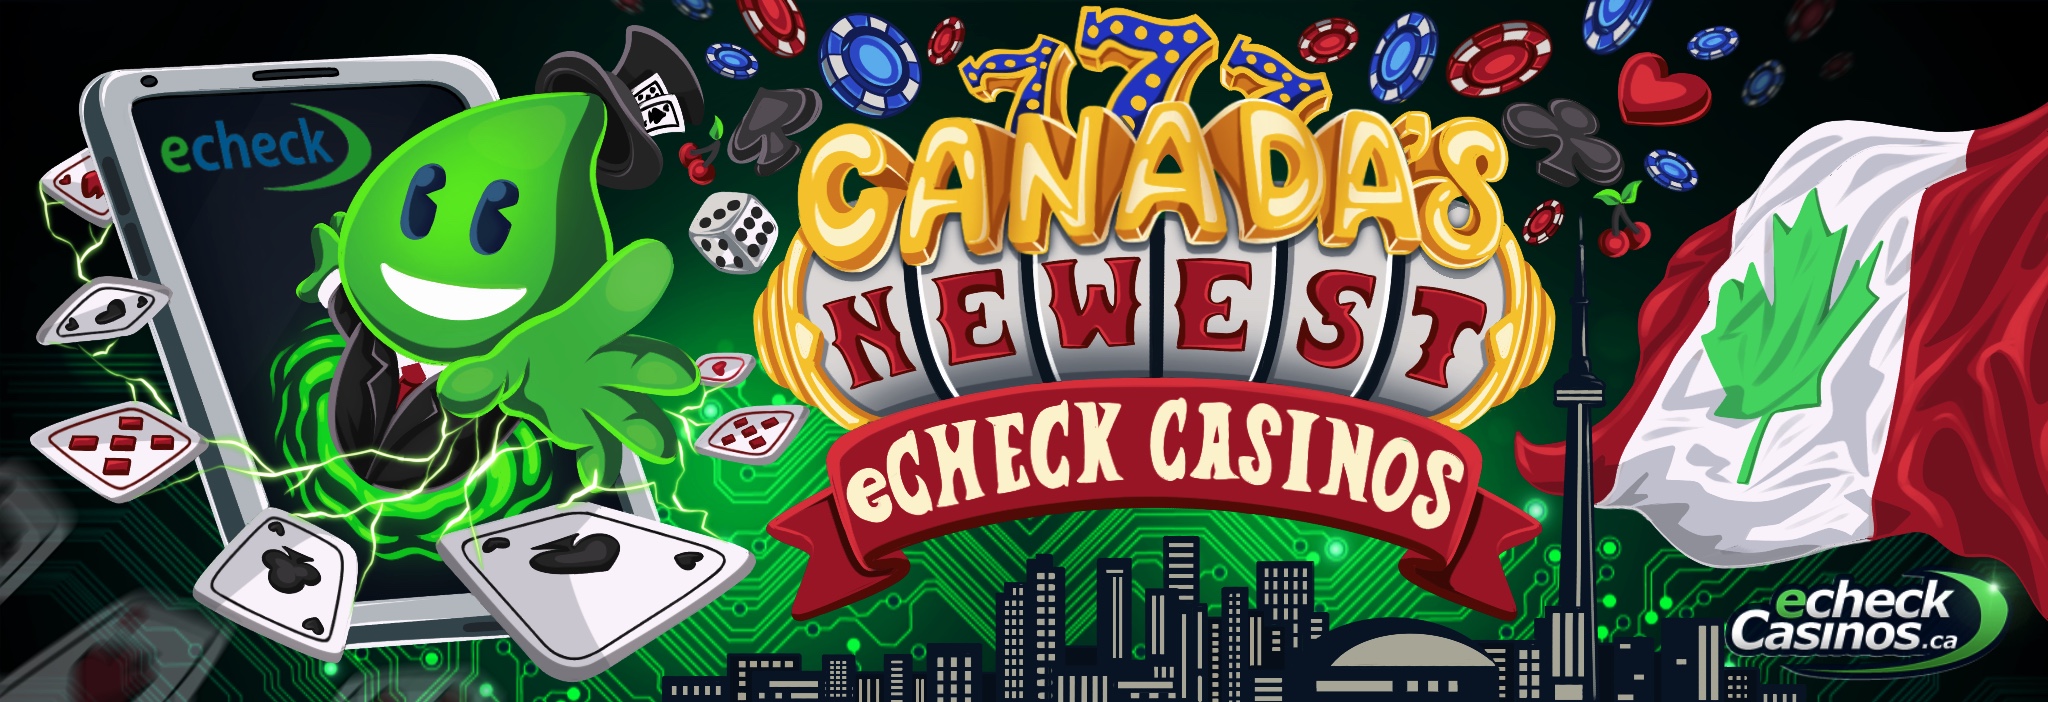 Illustration capturing the excitement of the launch of new eCheck casinos against the Canadian skyline.